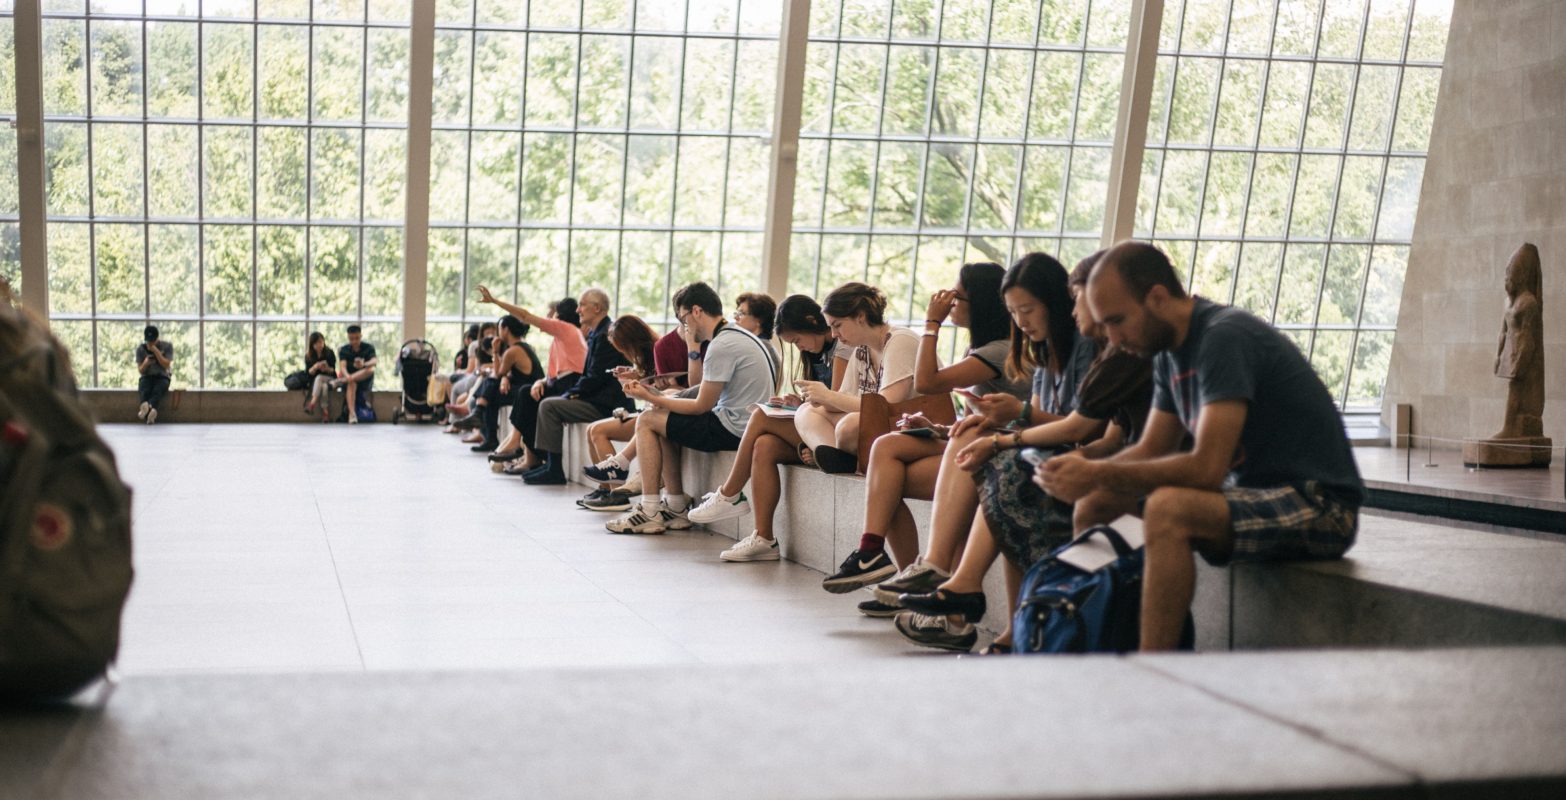 image of people sat in museum - courtesy of Daniel H Tong